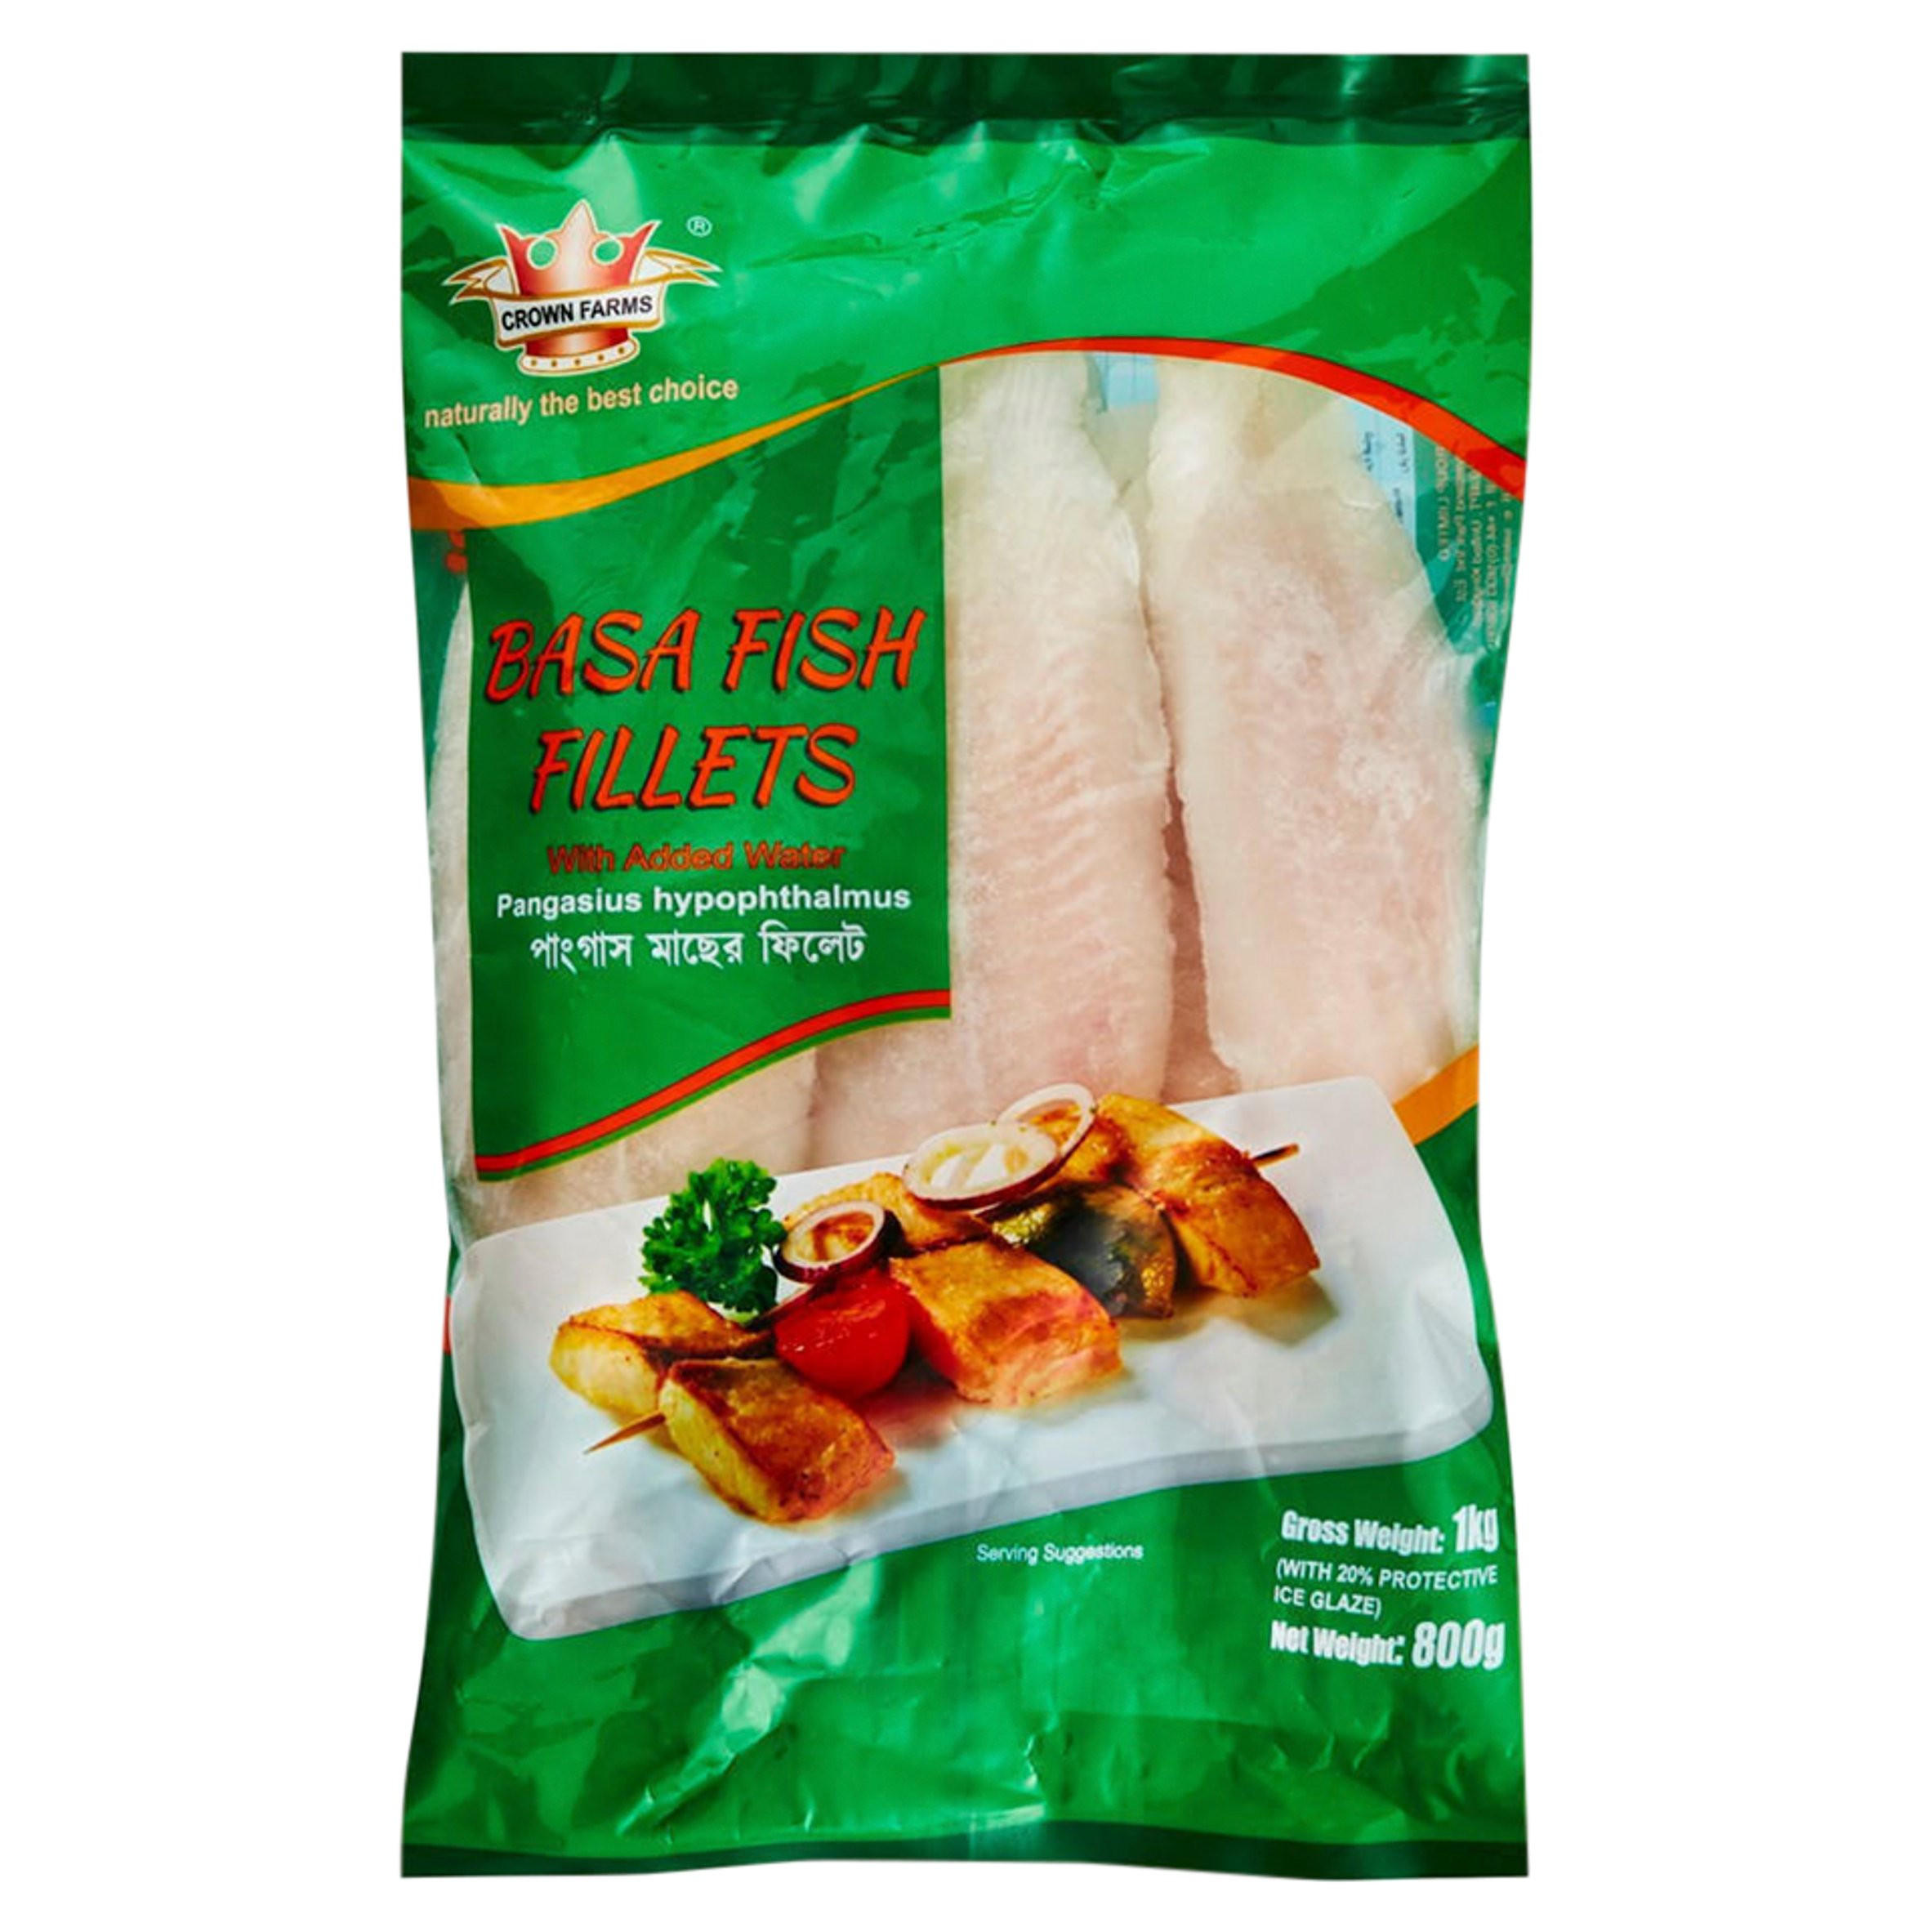 Frozen Fish Fillets | Frozen Fish & Seafood | Iceland Foods